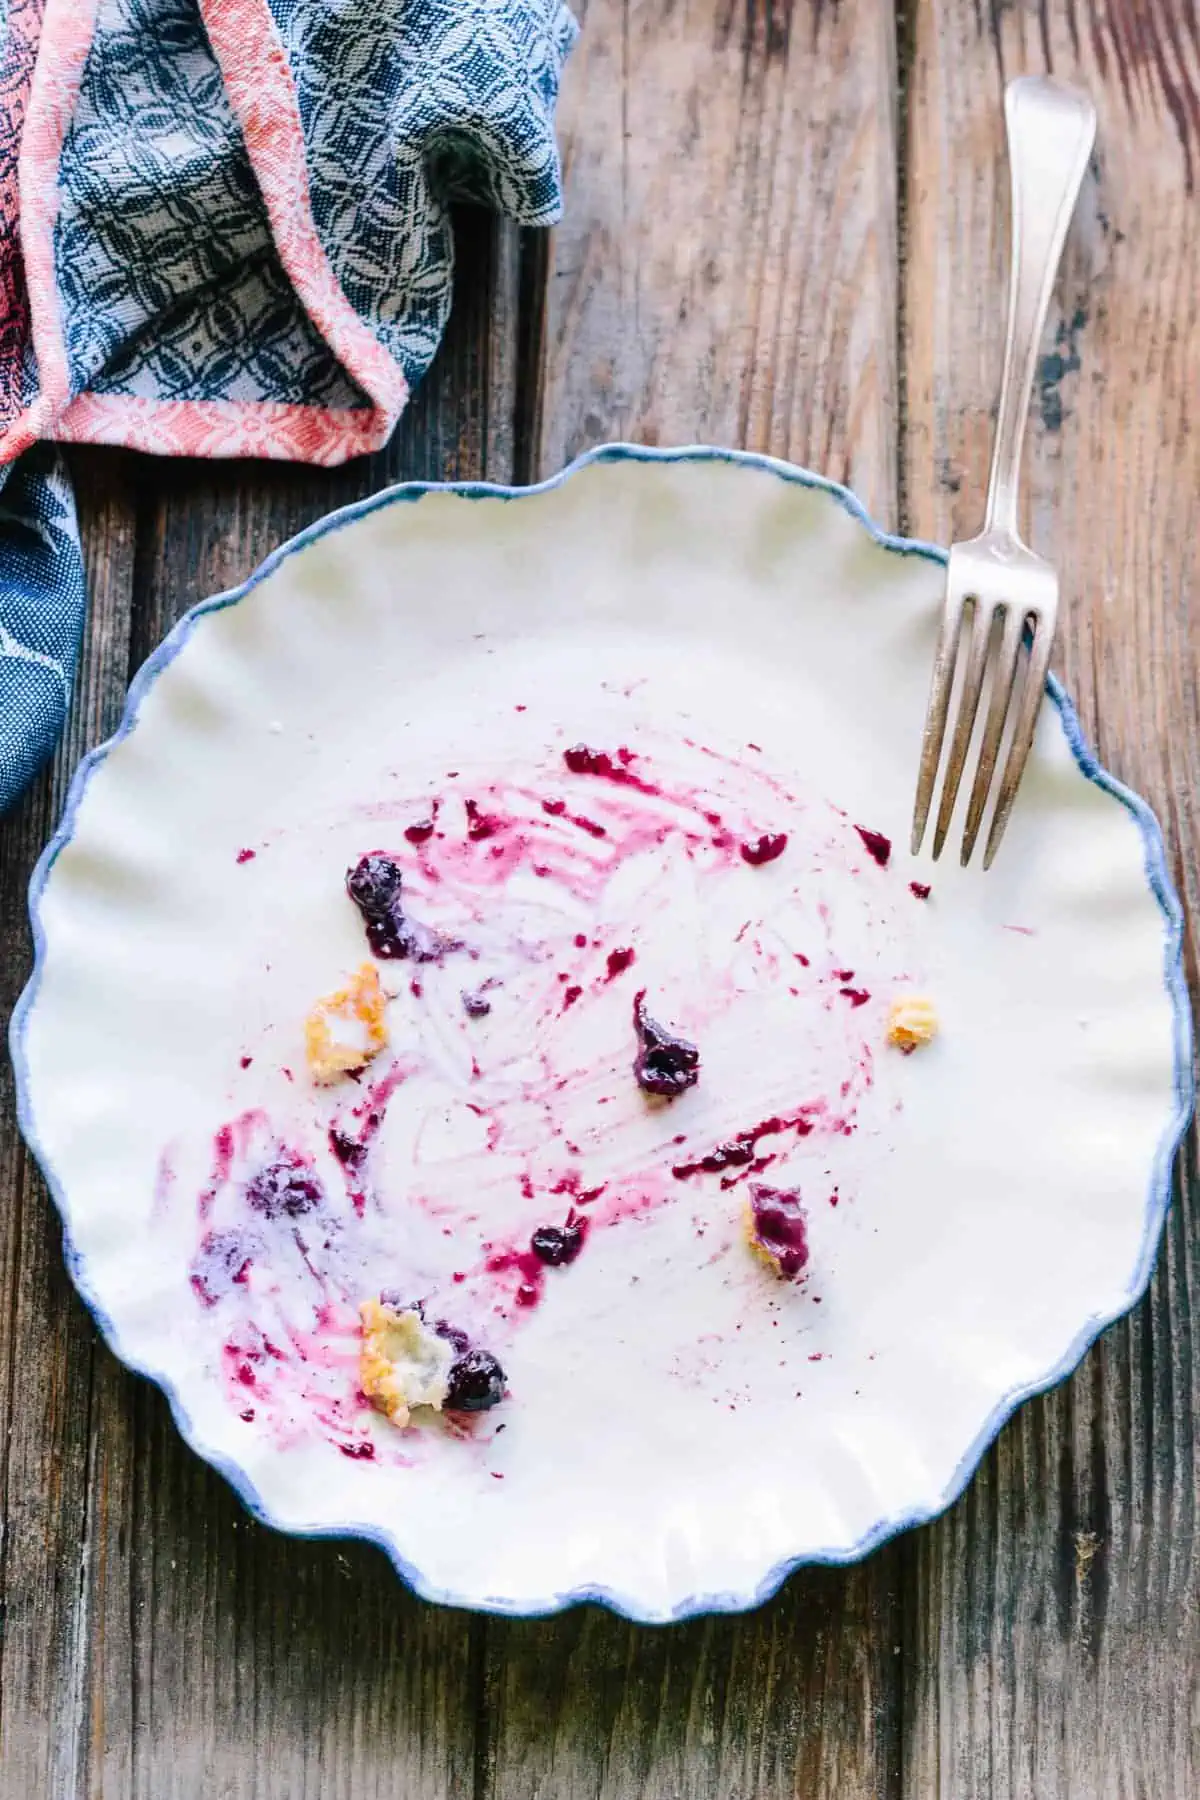 An empty dessert plate with streaks of blueberry pie filling.